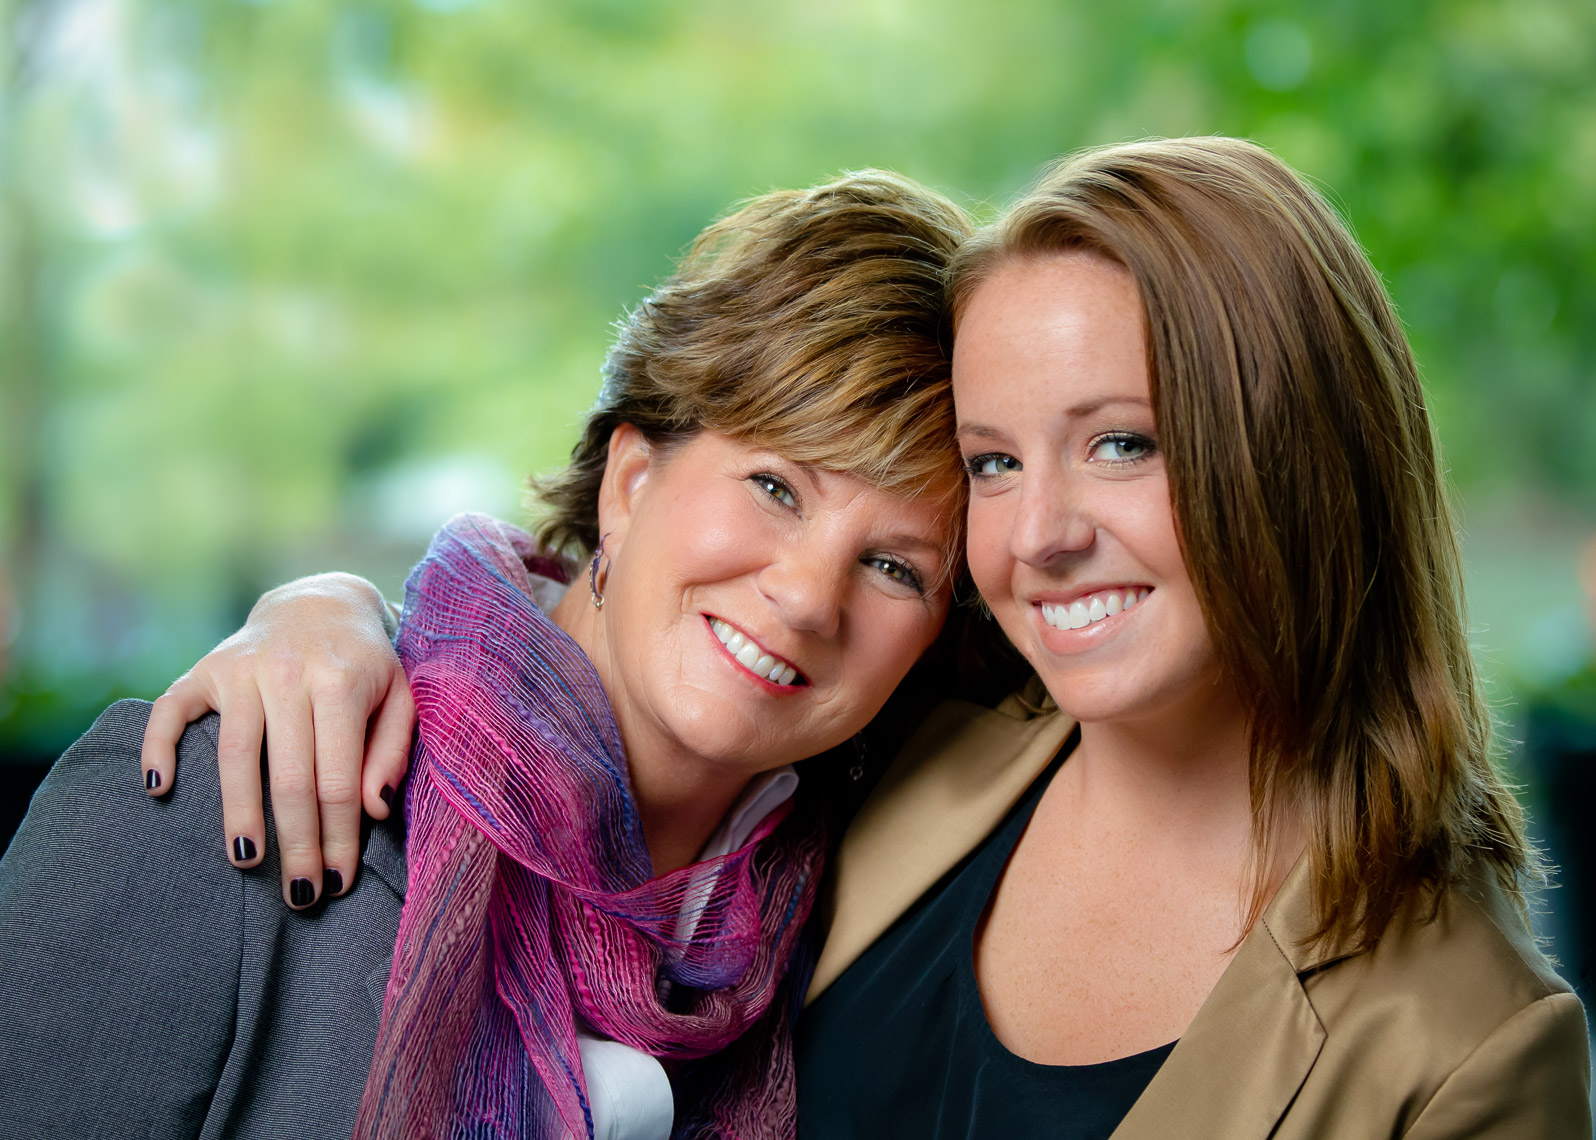 Environmental Portrait of Mother and Daughter